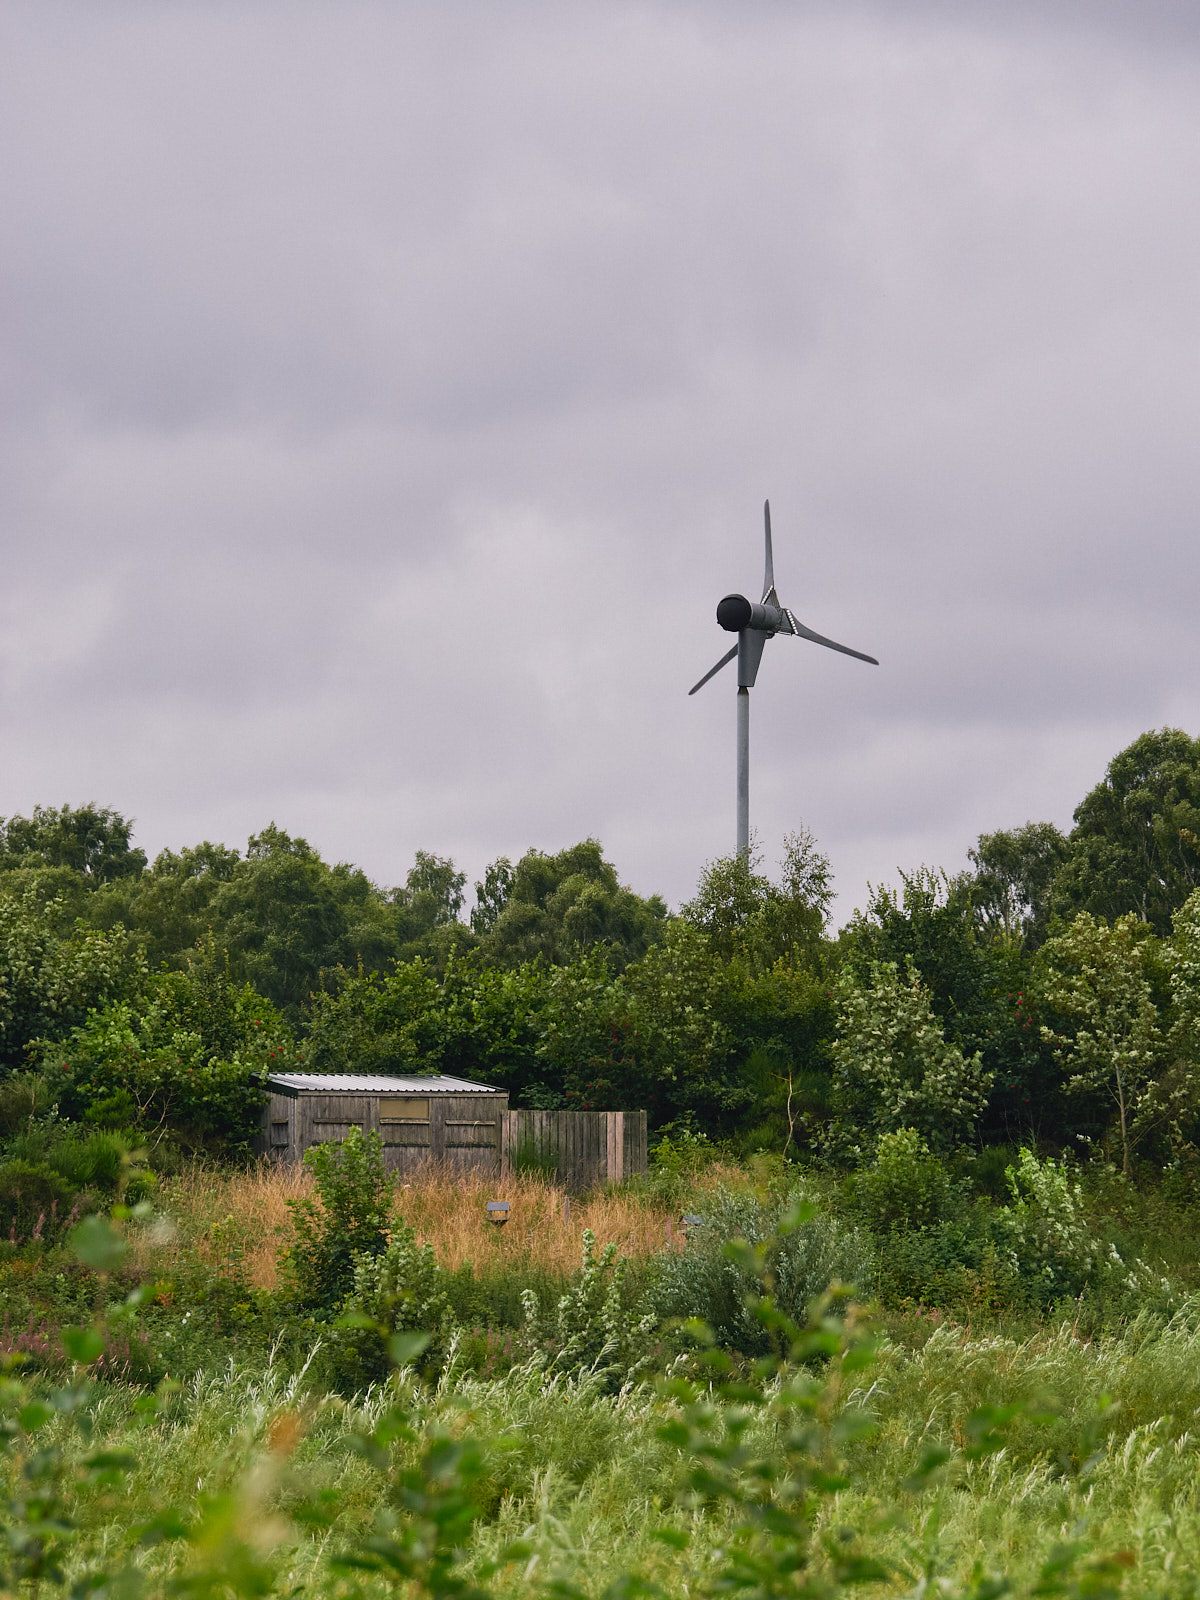 A small wooden shed surrounded by bushes and trees swaying in the wind. A wind turbine stands in the background